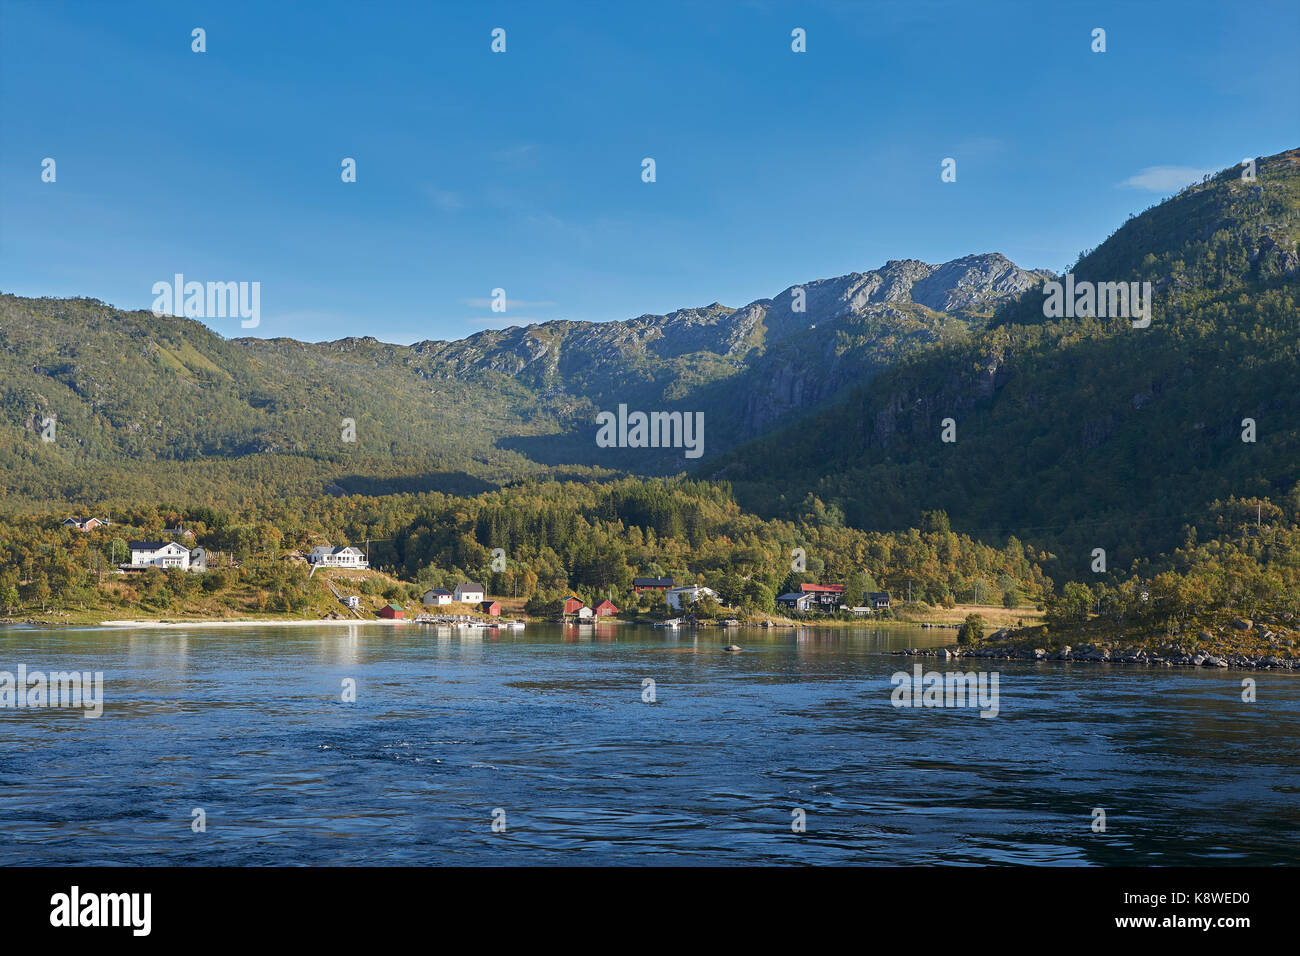 The Small Village Community Of Summer Cabins At Tengelfjord On The Banks Of The Raftsund Fjord, Far North Of The Norwegian Arctic Circle. Stock Photo